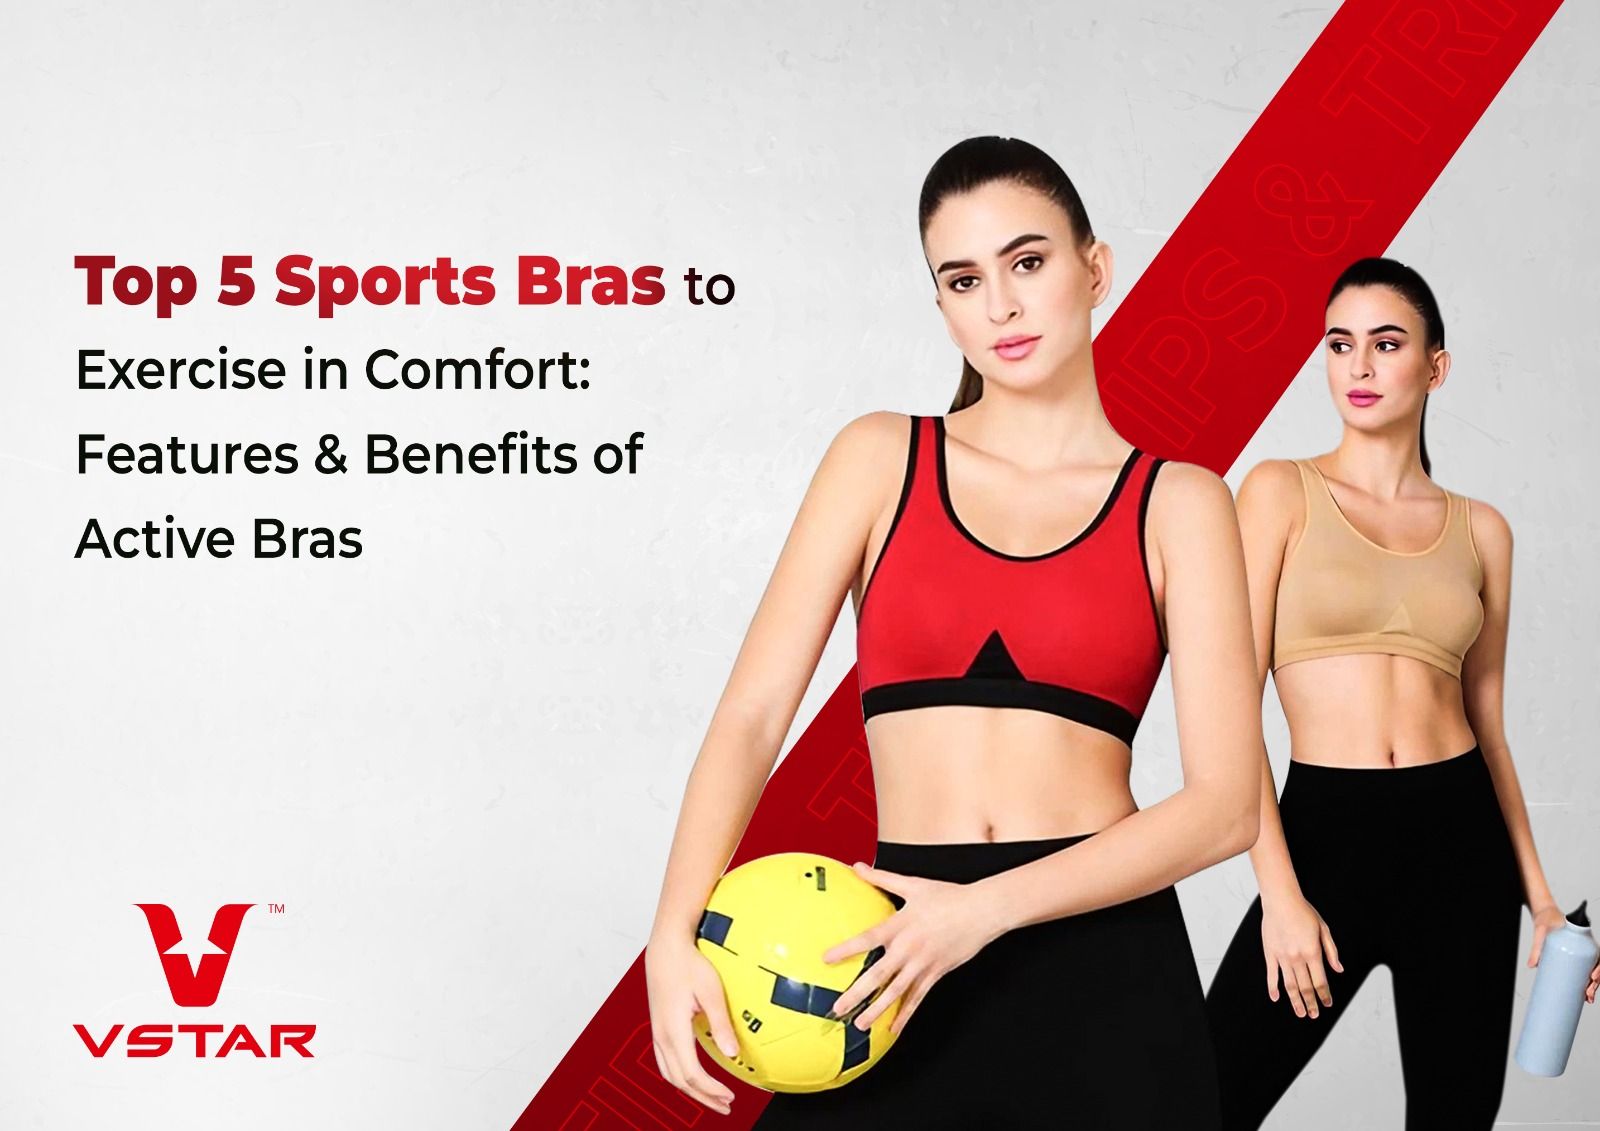 Top 5 Sports Bras to Exercise in Comfort: Features & Benefits of